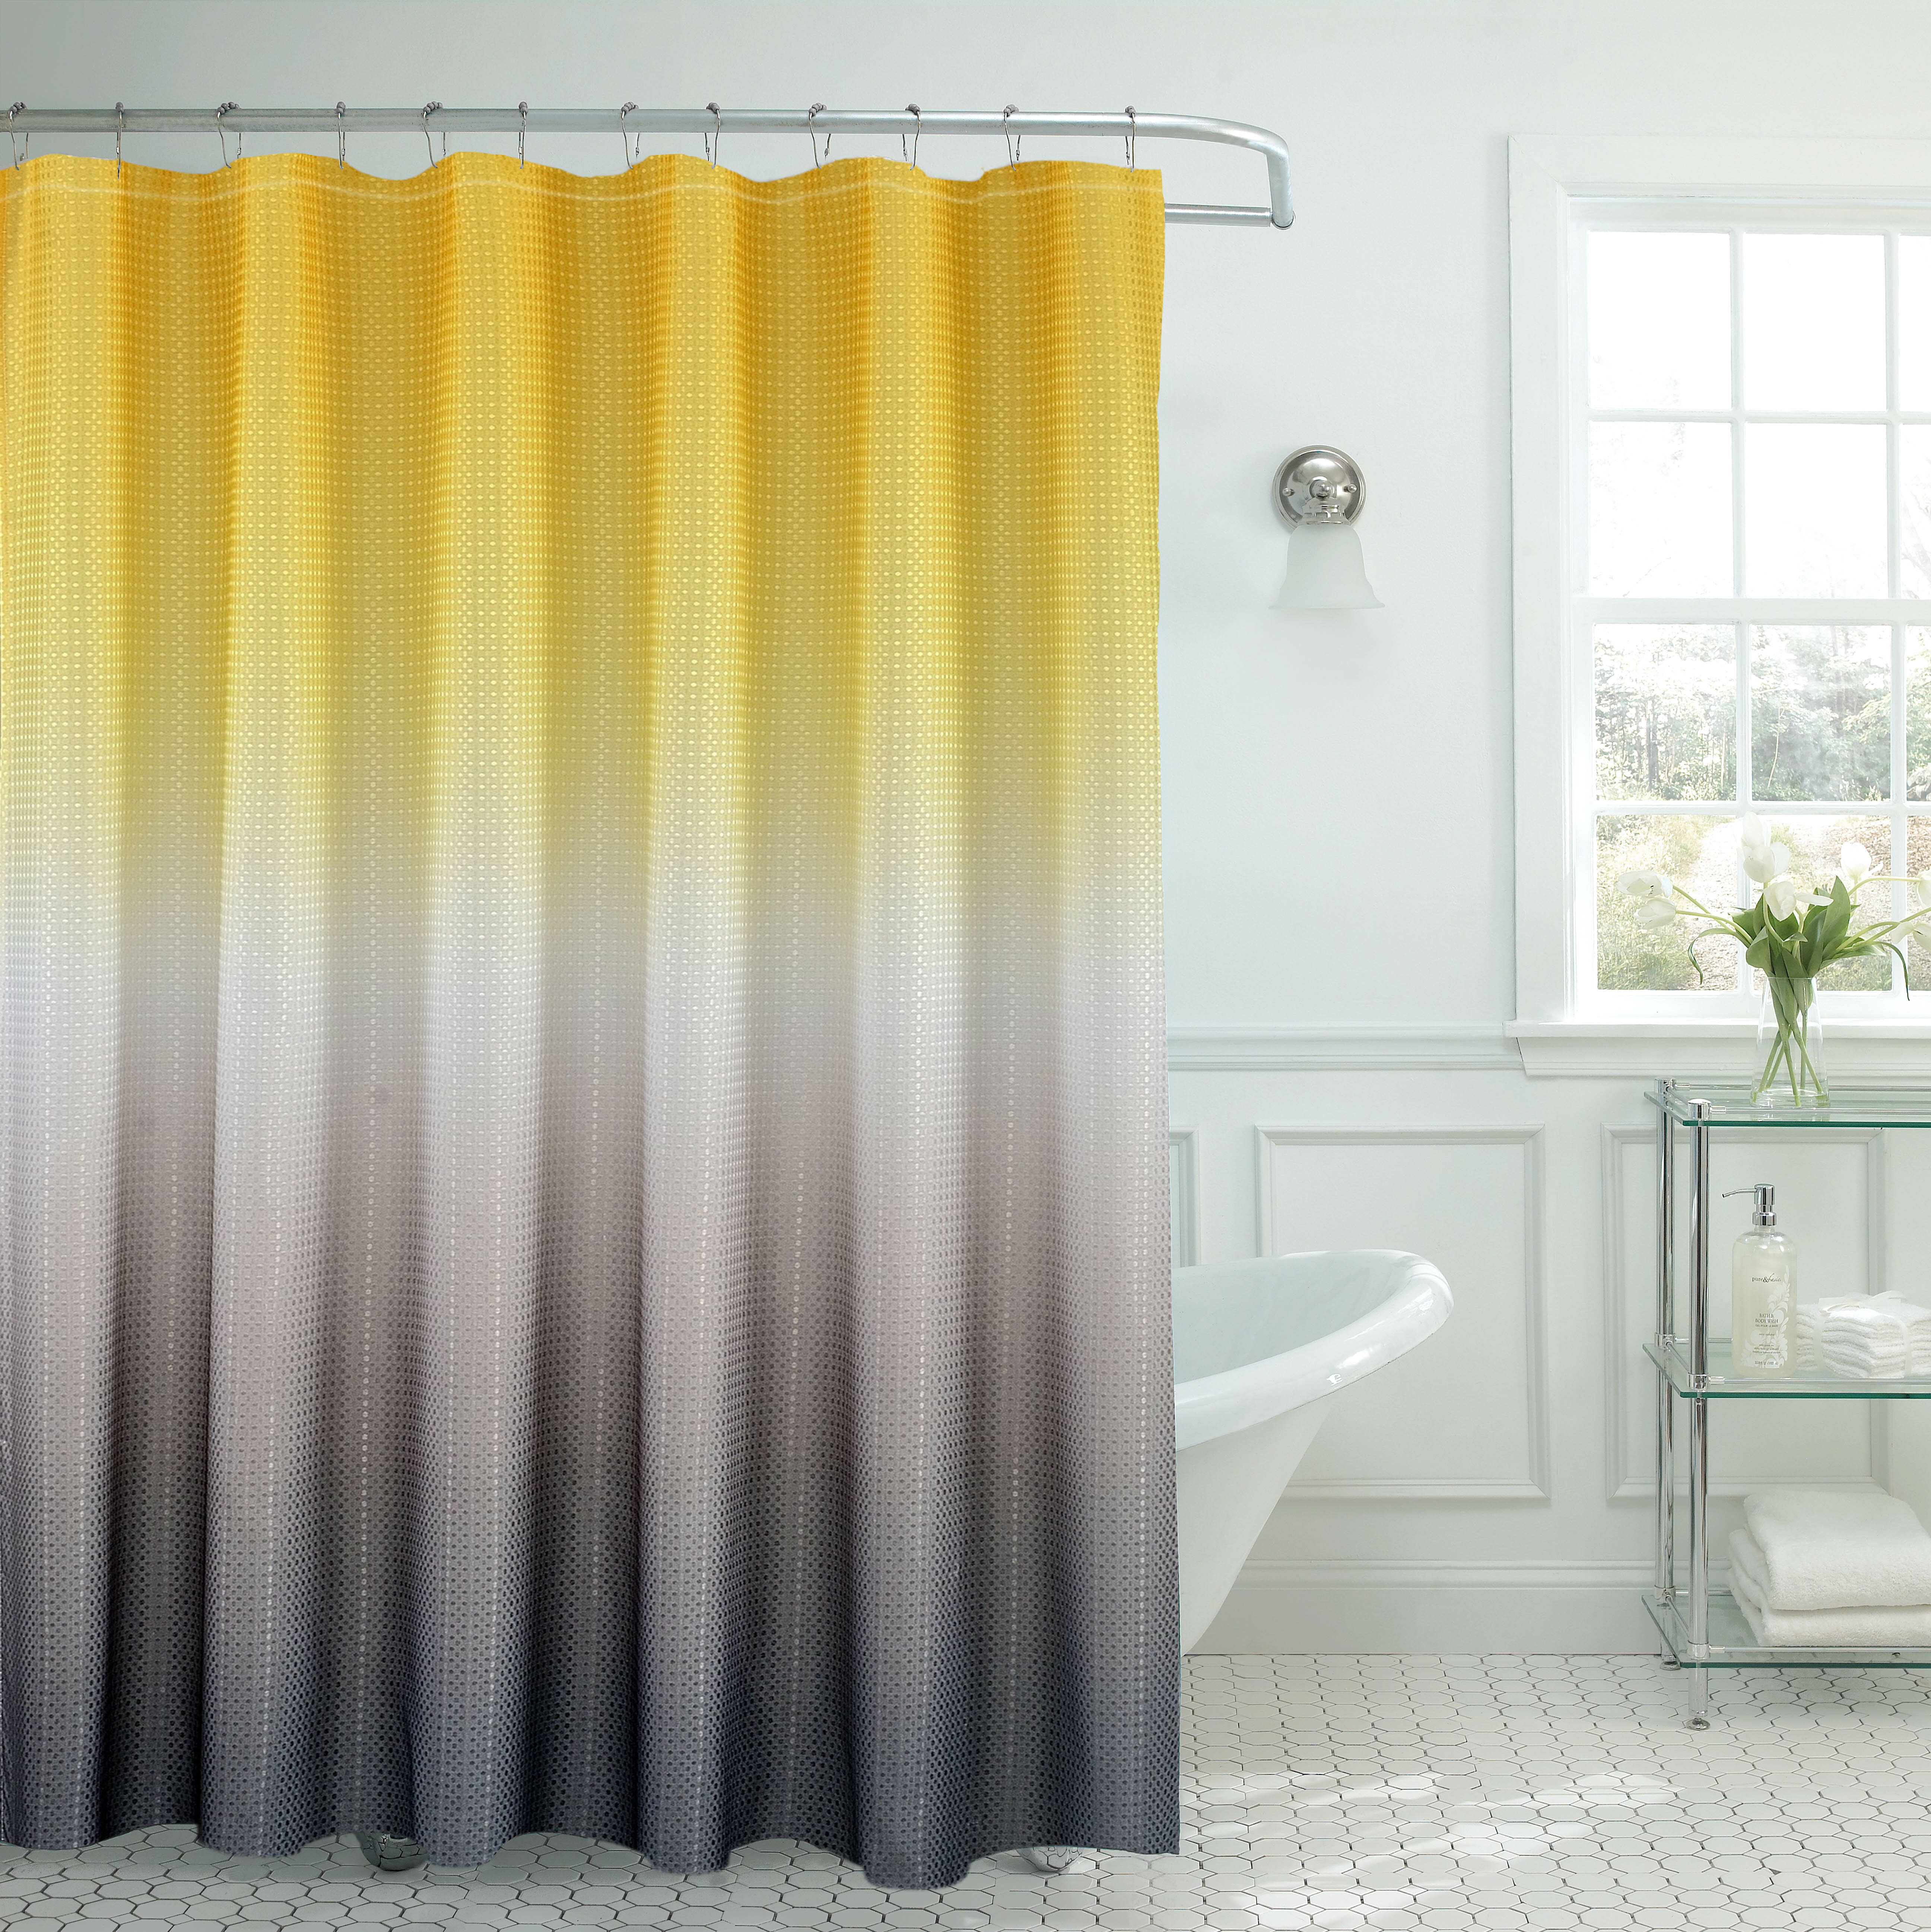 Ebern Designs Rohando Ombre Shower Curtain with Hooks Included & Reviews